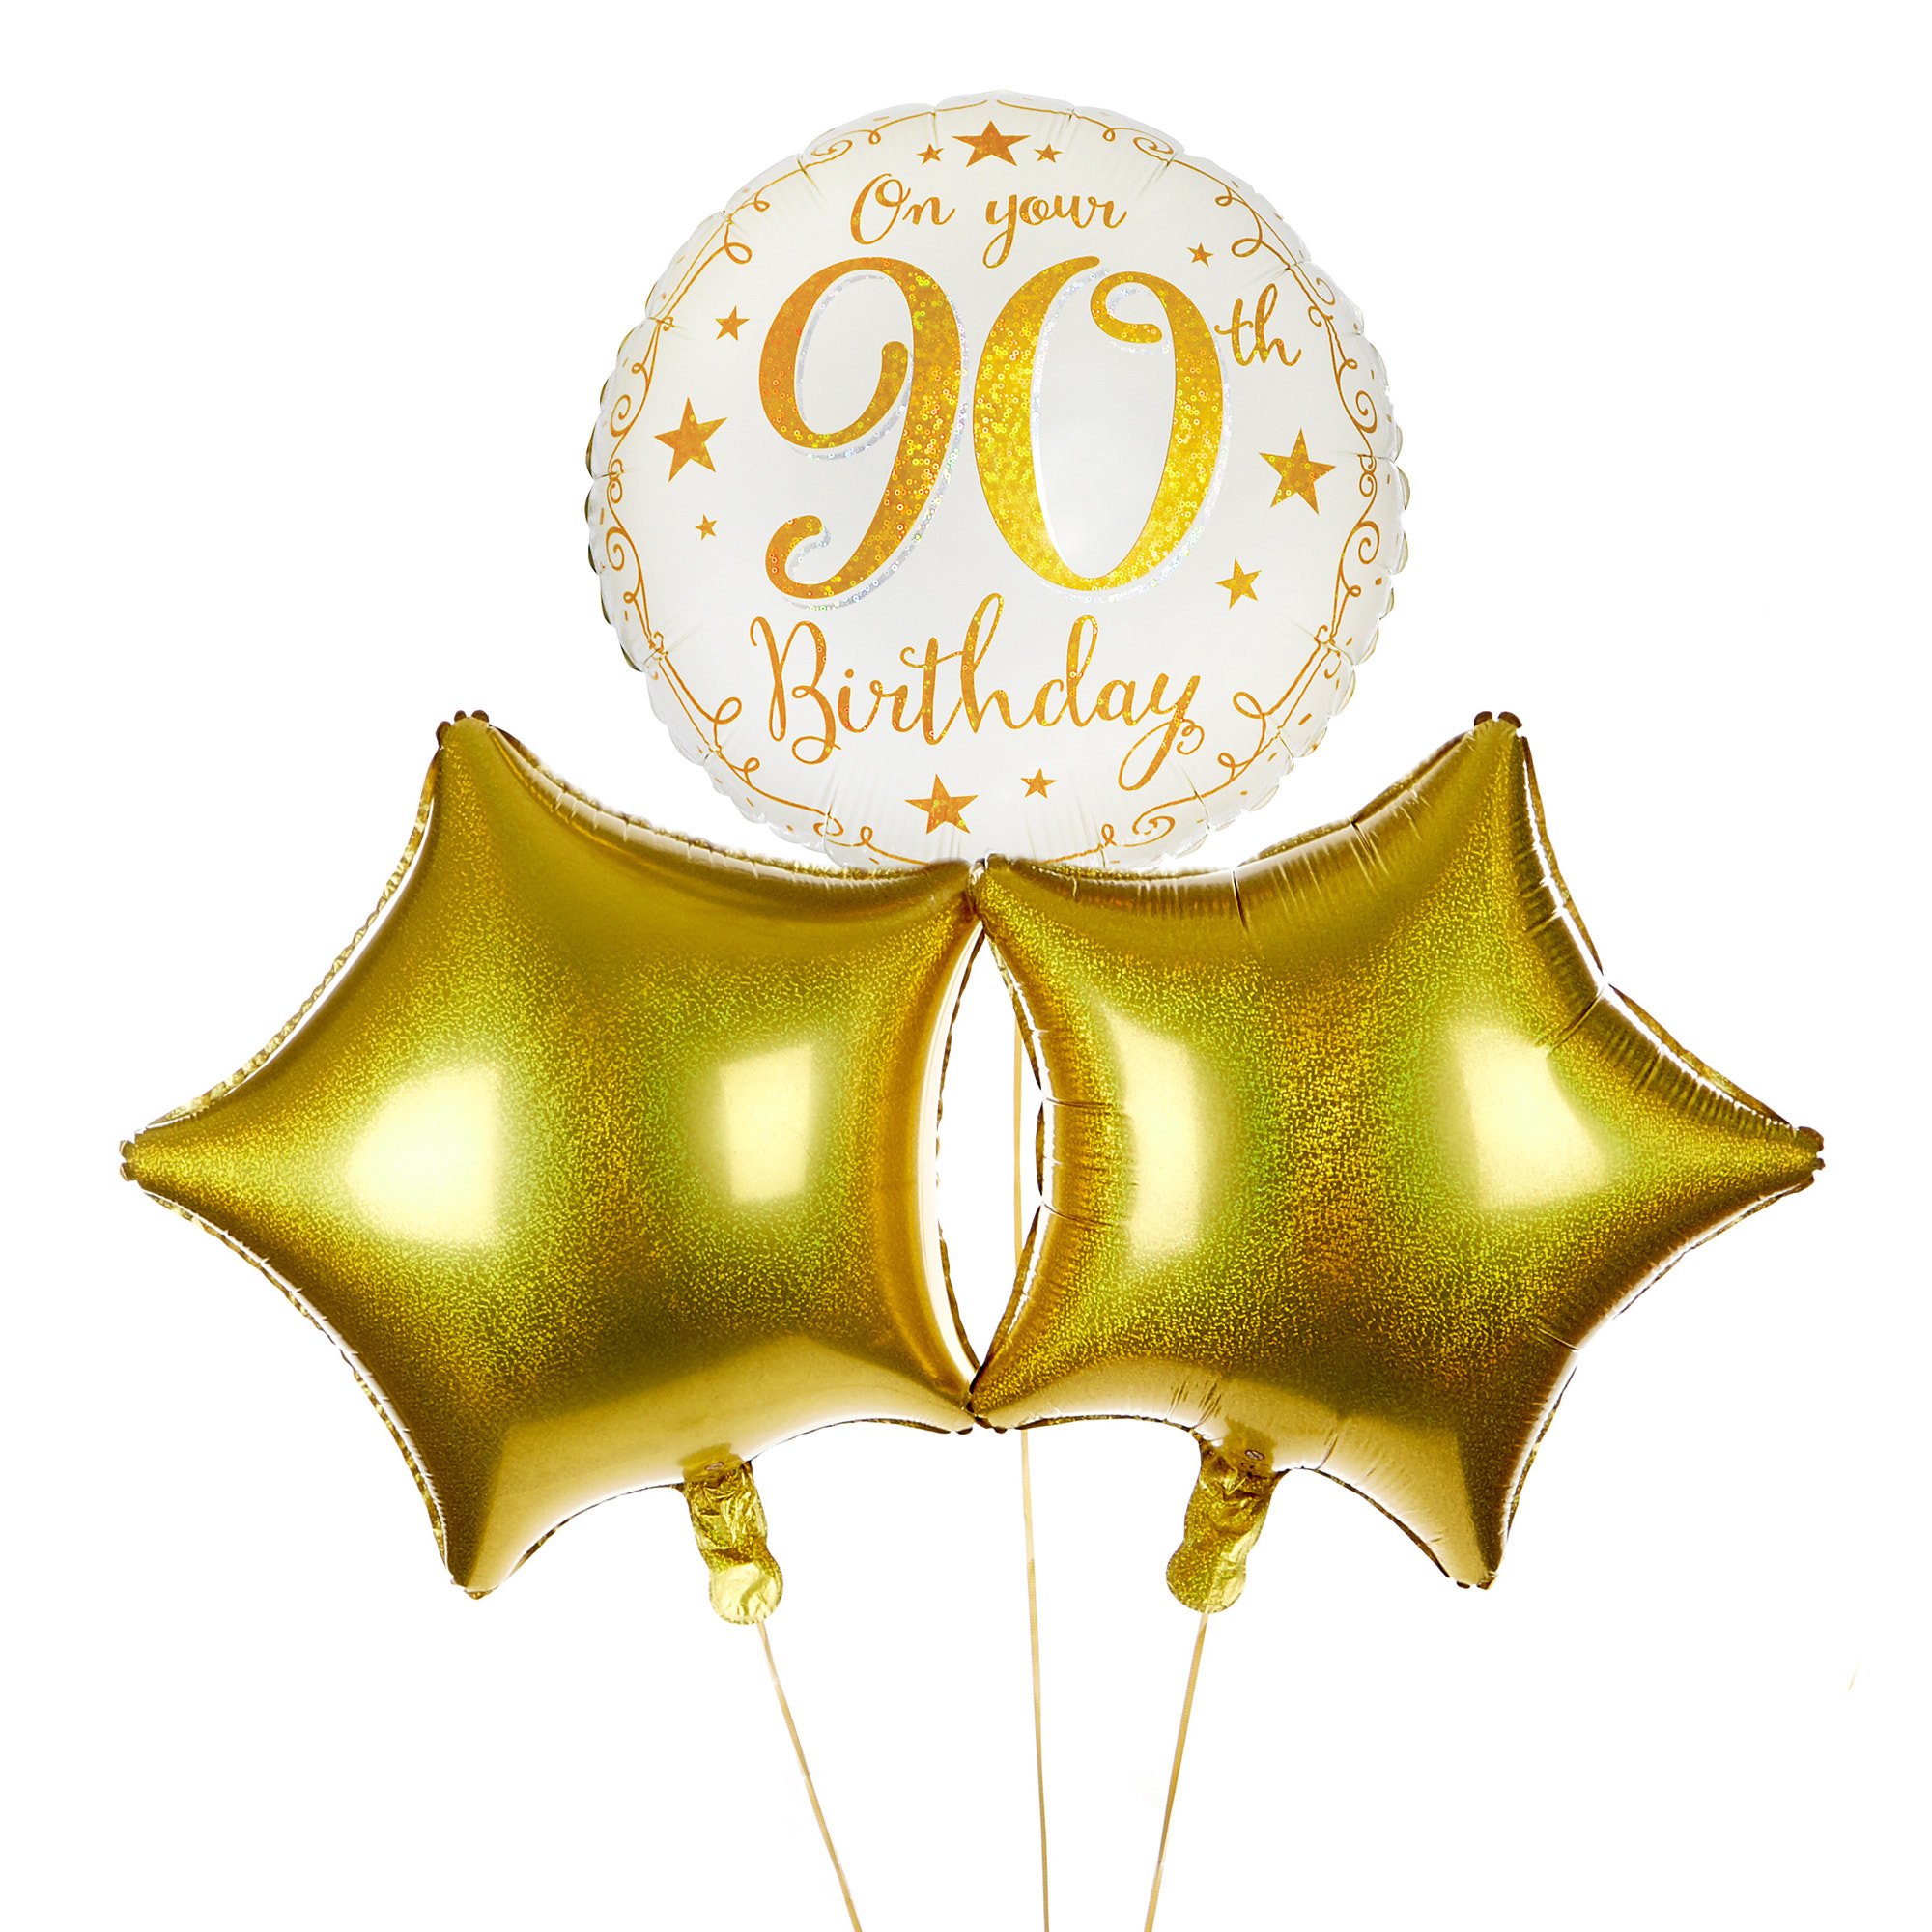 Gold Stars 90th Birthday Balloon Bouquet - DELIVERED INFLATED!